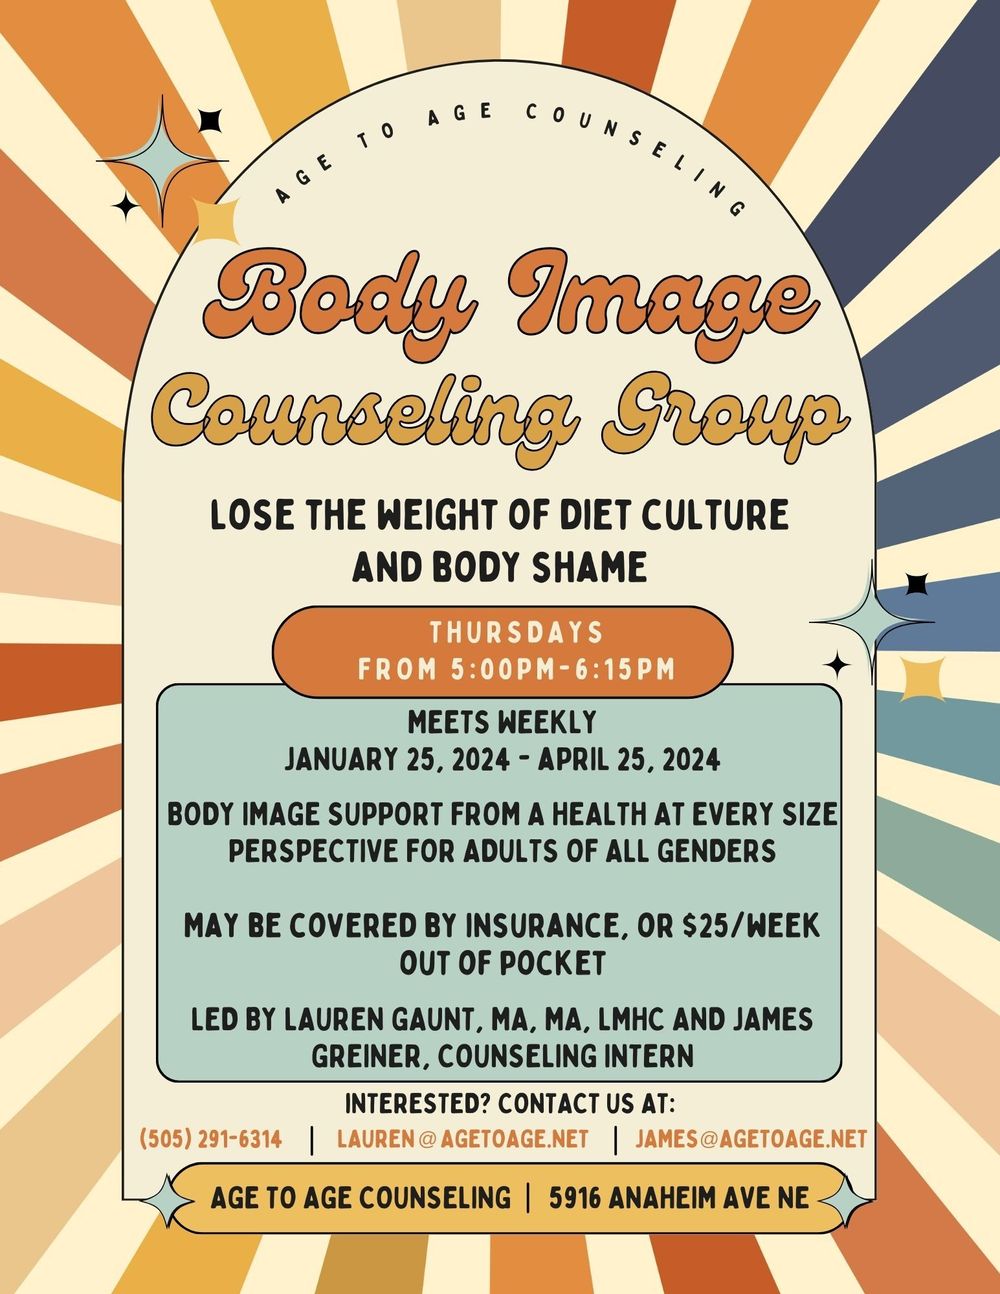 Body Image group counseling available starting in January 2024. Further details in flyer; contact with any questions or if interested!